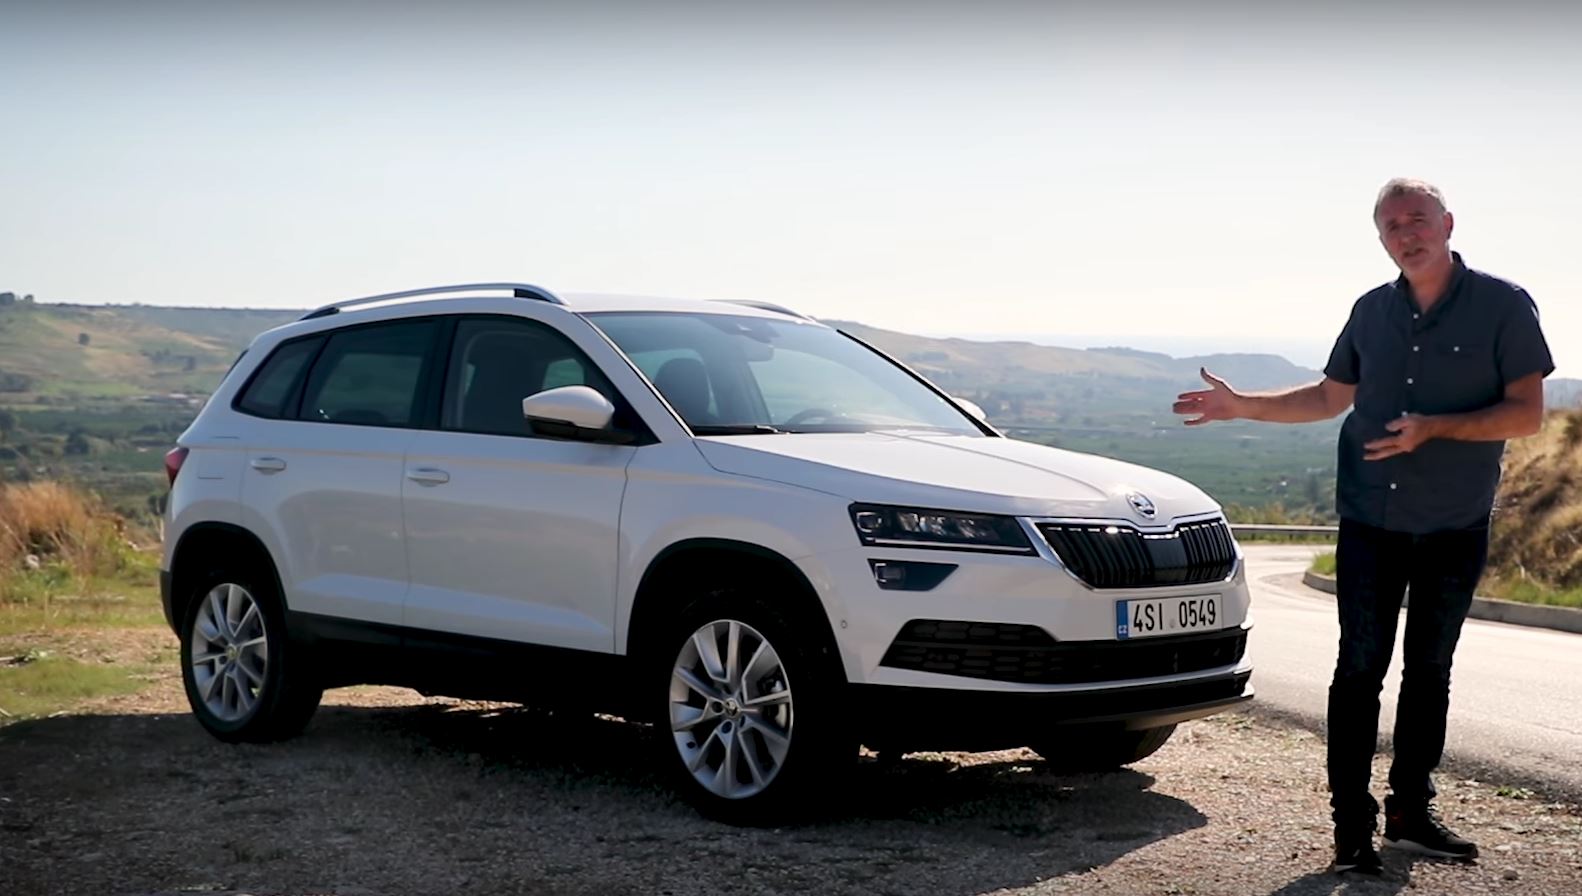 Skoda Karoq First Review Says It's a Great Family Car With Soft Suspension  - autoevolution